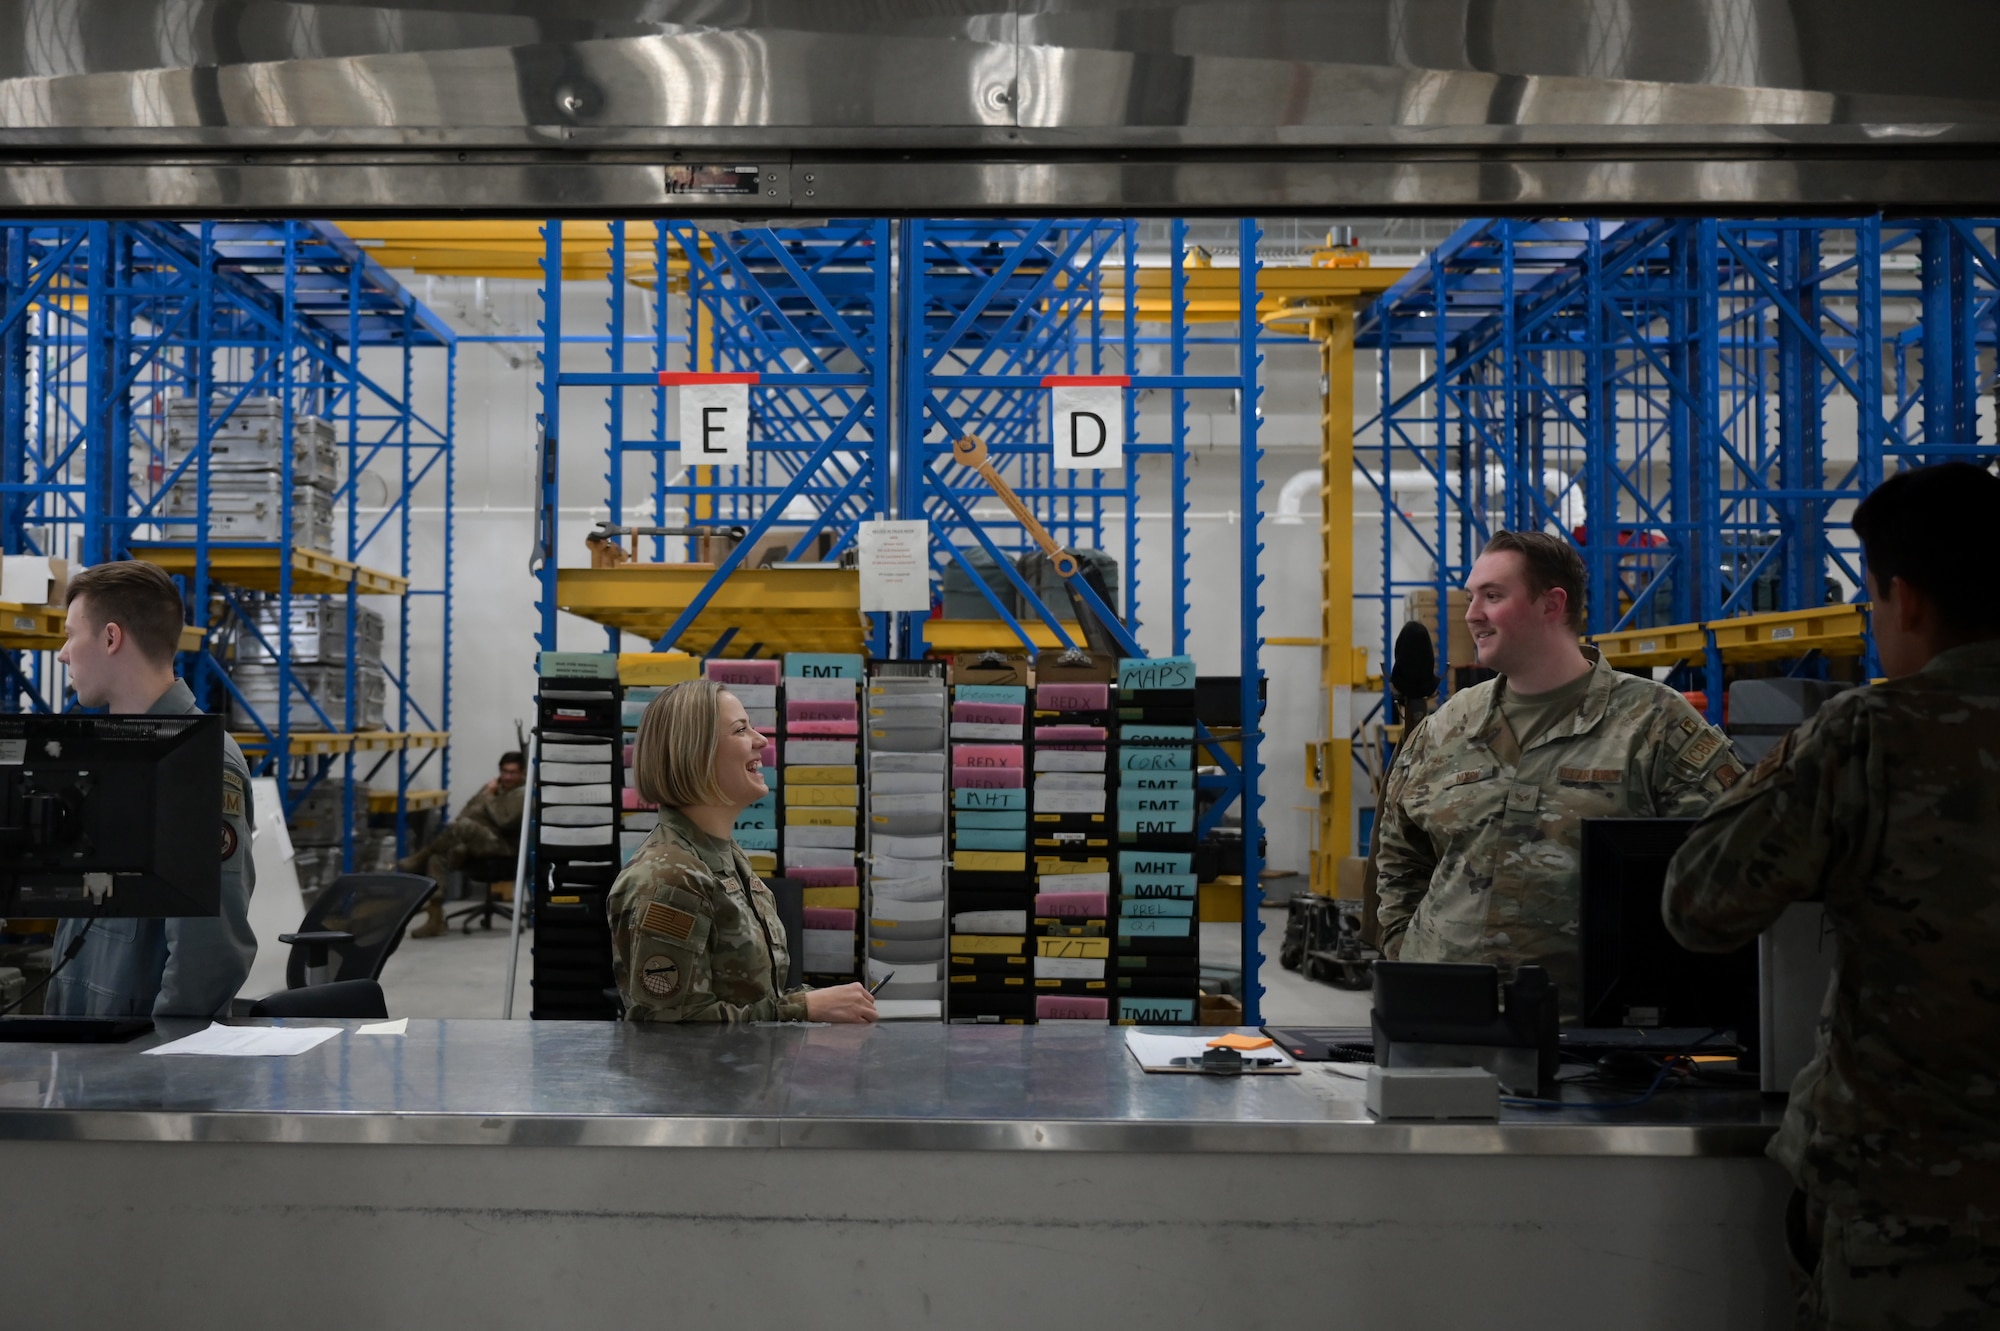 A woman and man in military uniform stand in an equipment bay talking to each other.